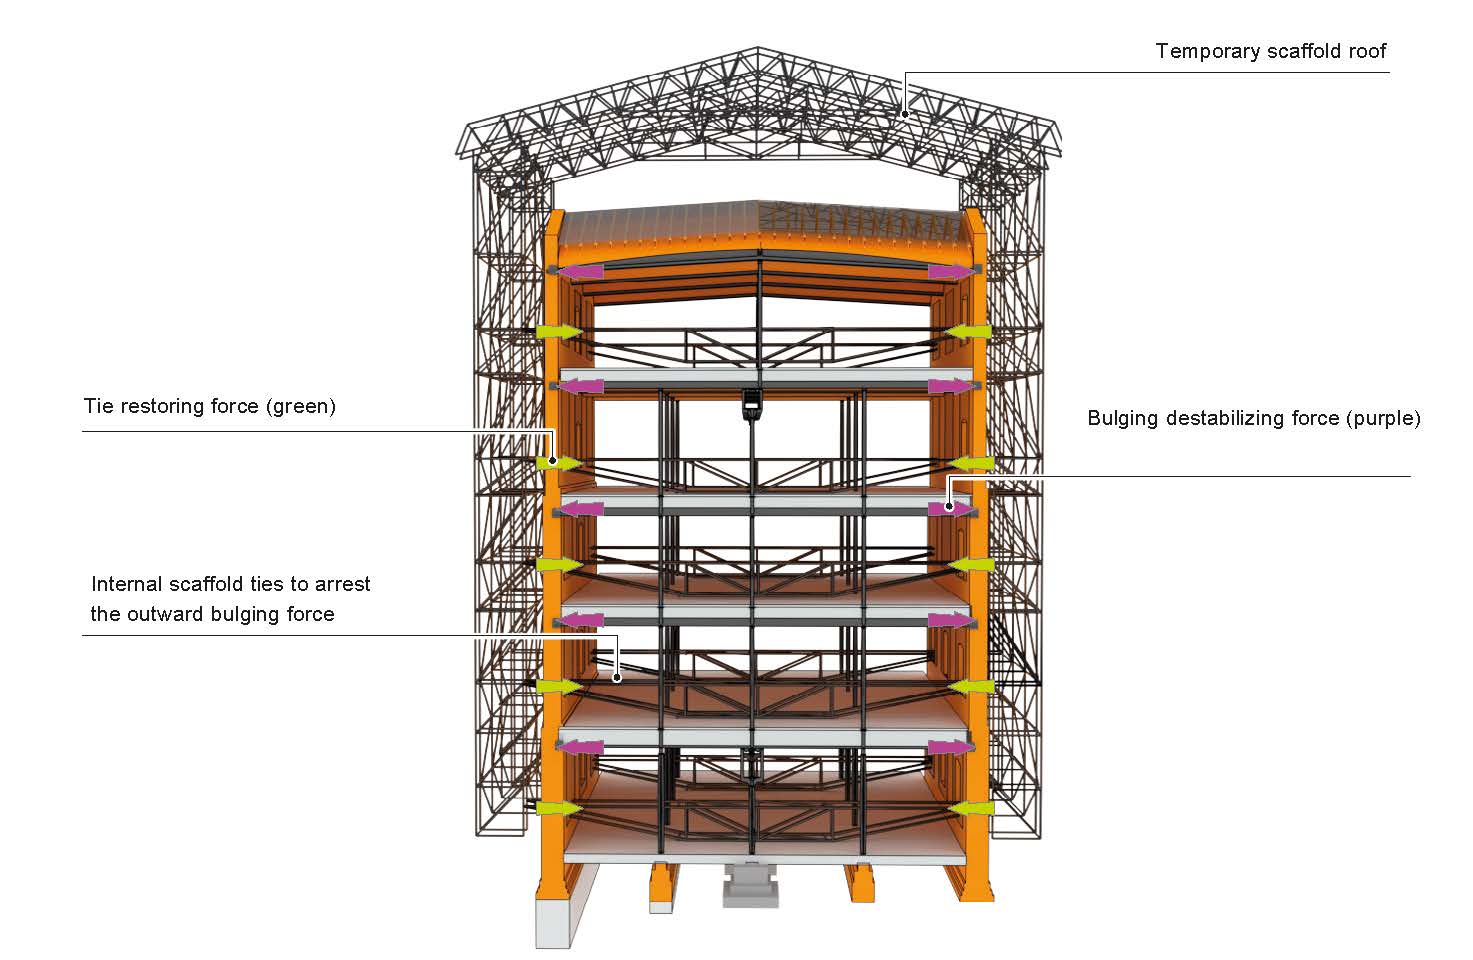 Image shows the various forces of propping scaffolding such as restoring, bulging, and destabilizing forces.